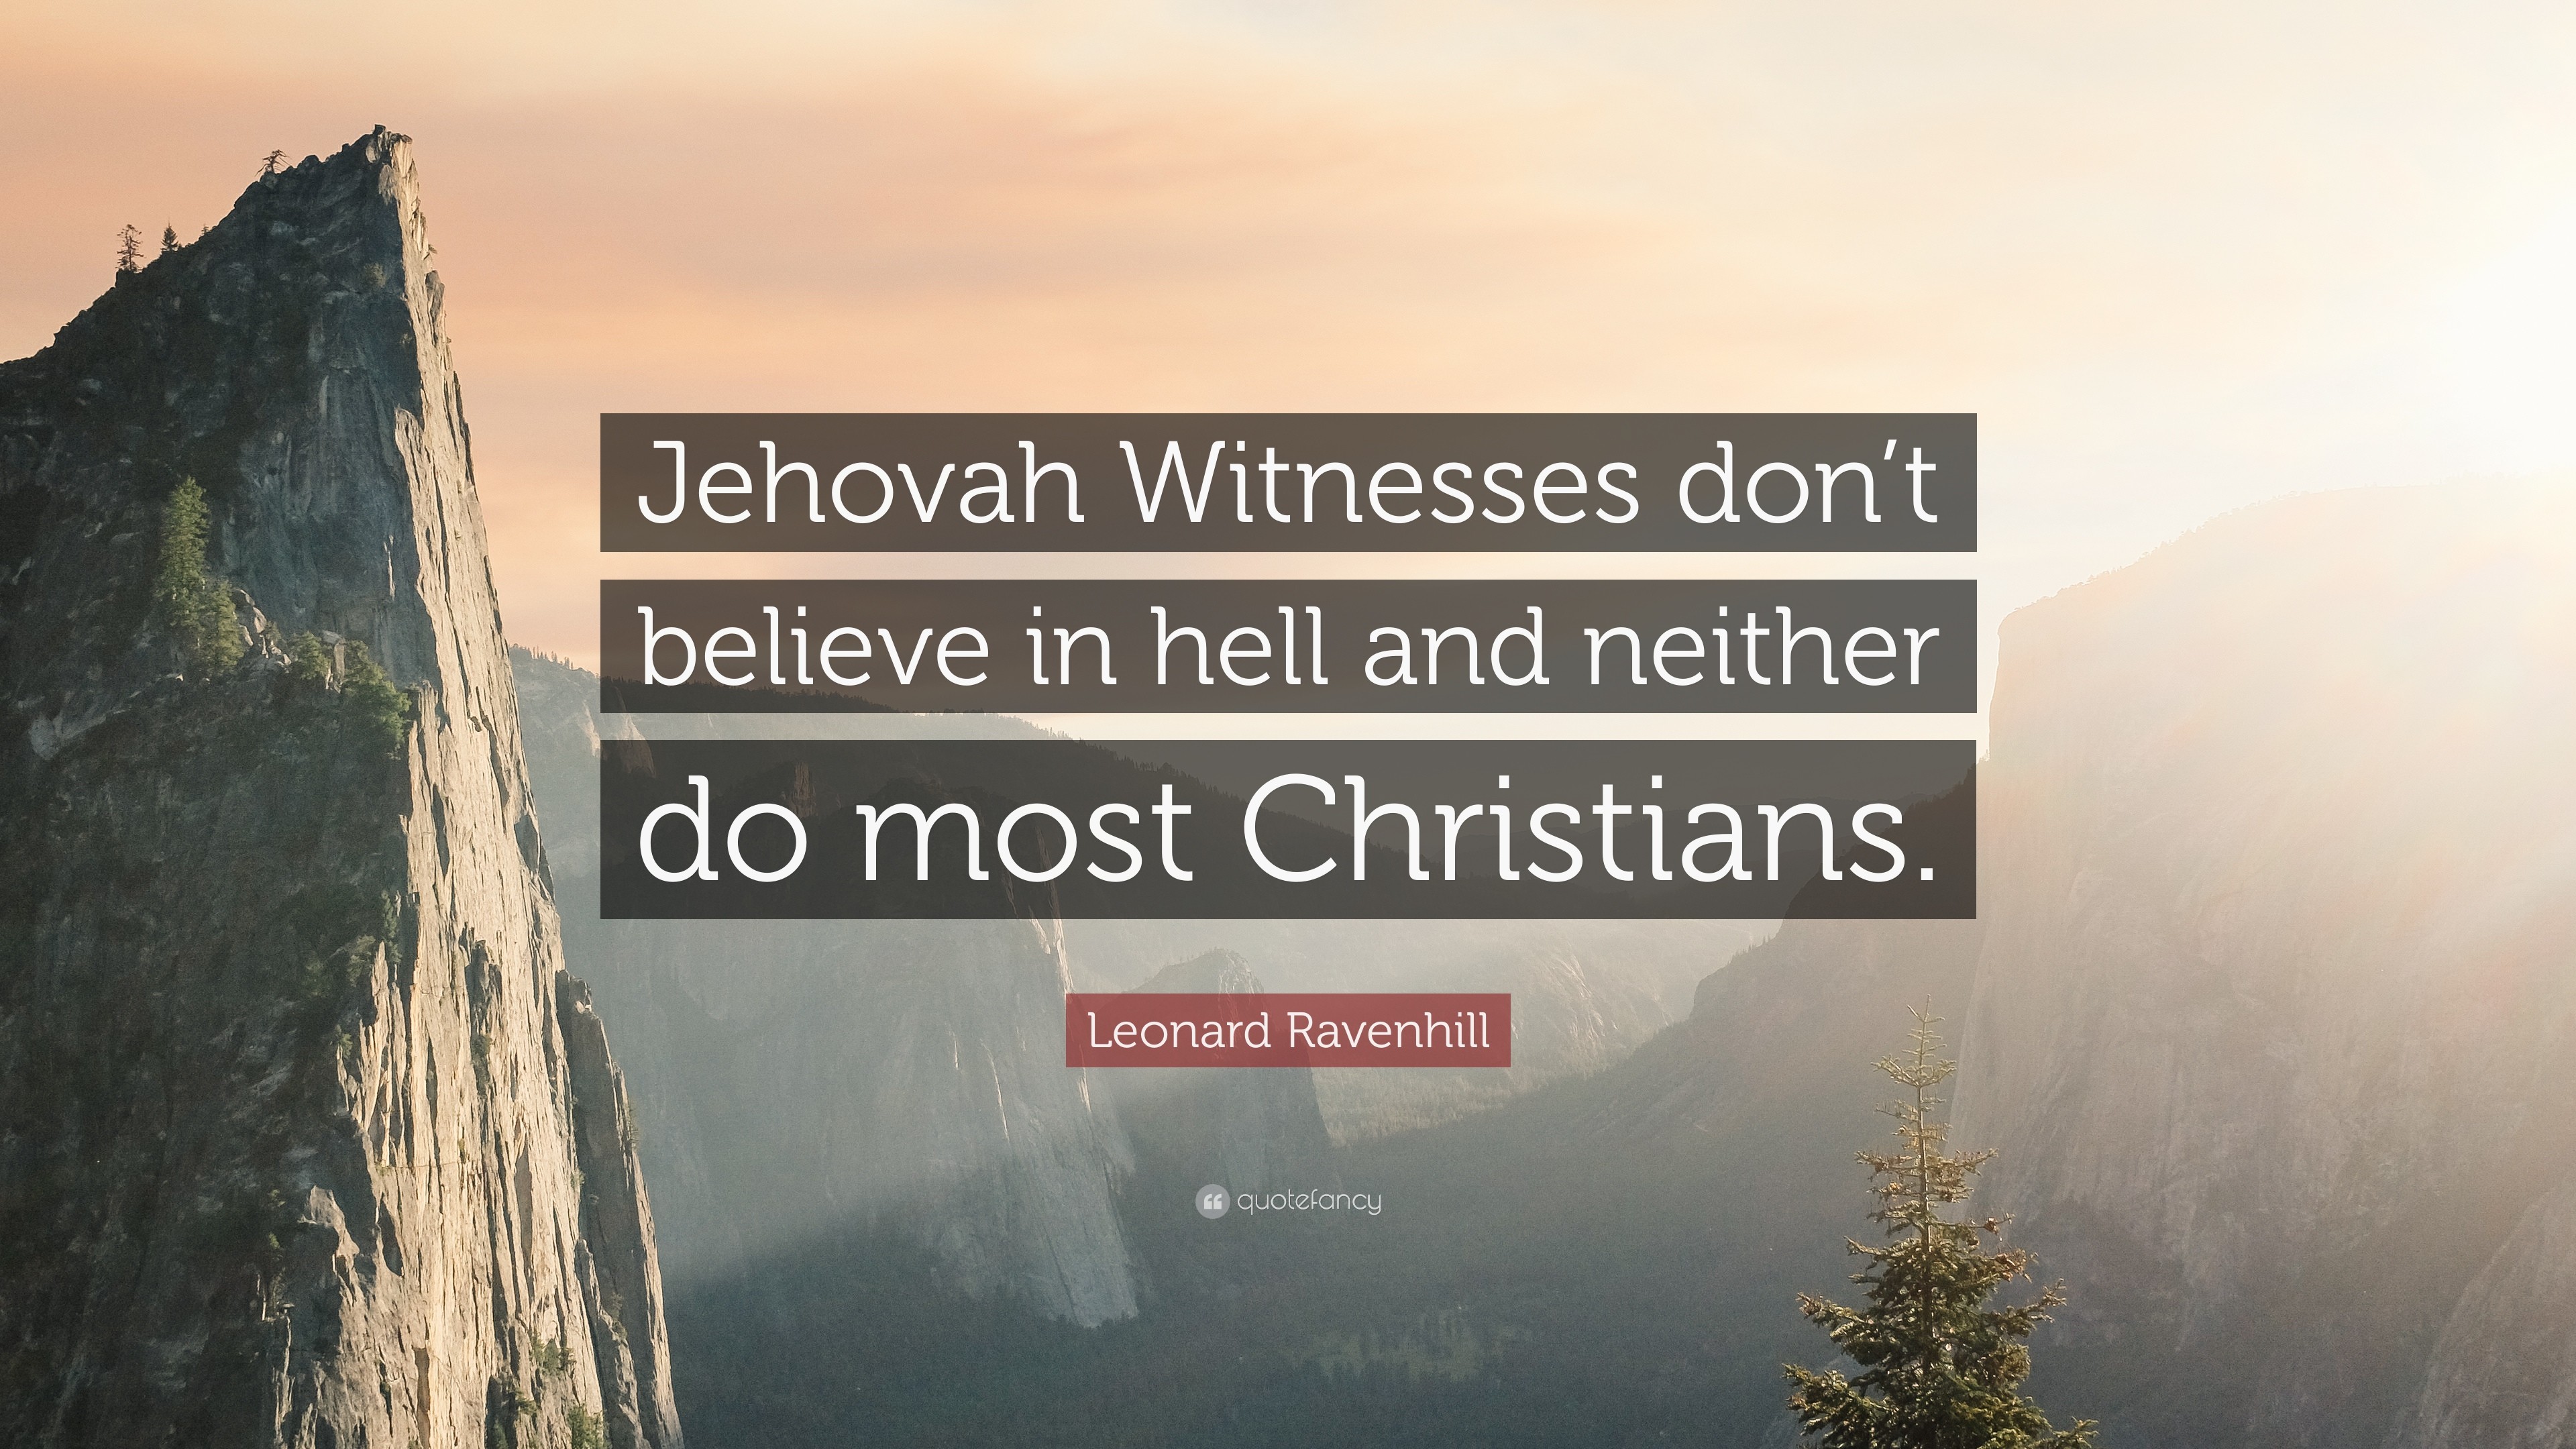 Leonard Ravenhill Quote Jehovah Witnesses dont believe in hell and neither do